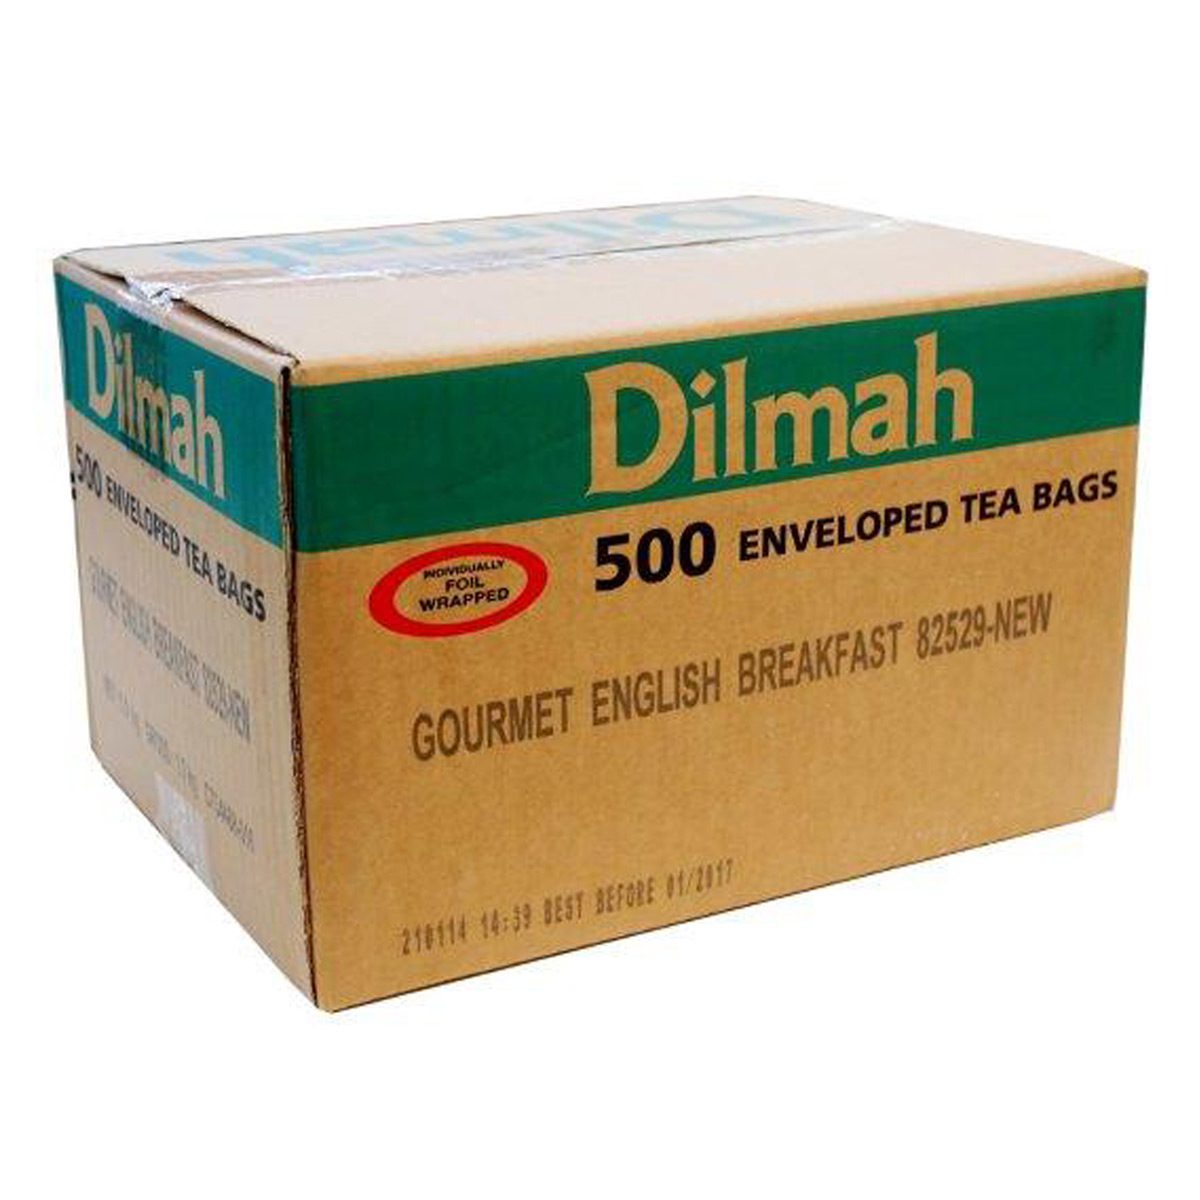 consumables-hospitality-beverage-food-dilmah-english-breakfast-teabags-500pk-finest-high-grown-ceylon-tea-strong-rich-full-bodied-flavour-functions-hotels-conferences-cafeterias-vjs-distributors-80491001